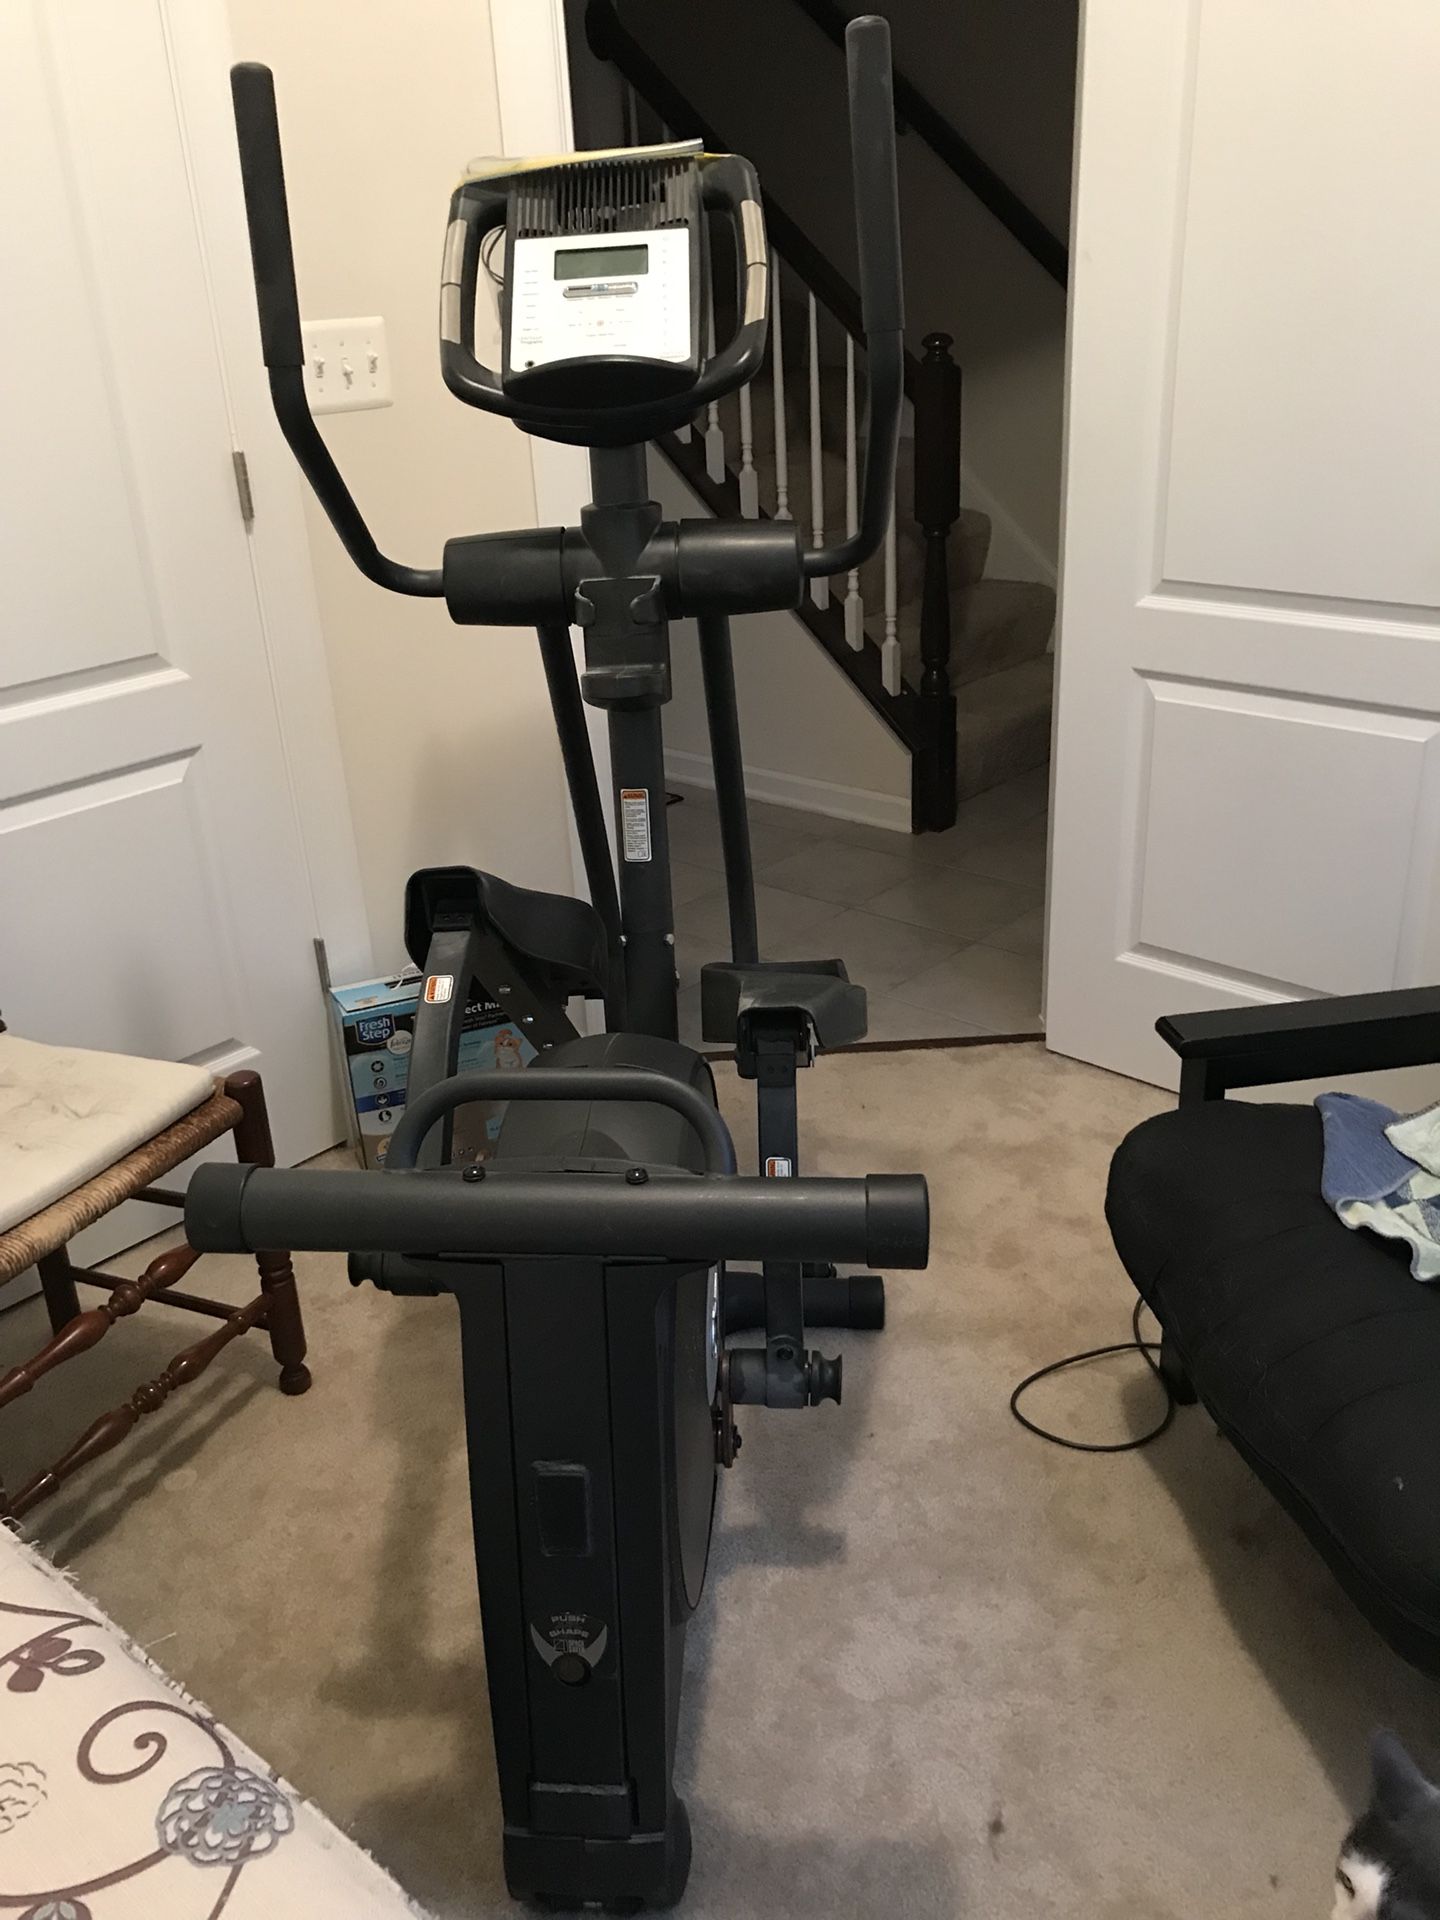 Nordic track elliptical ( on hold until 8 pm tonight )